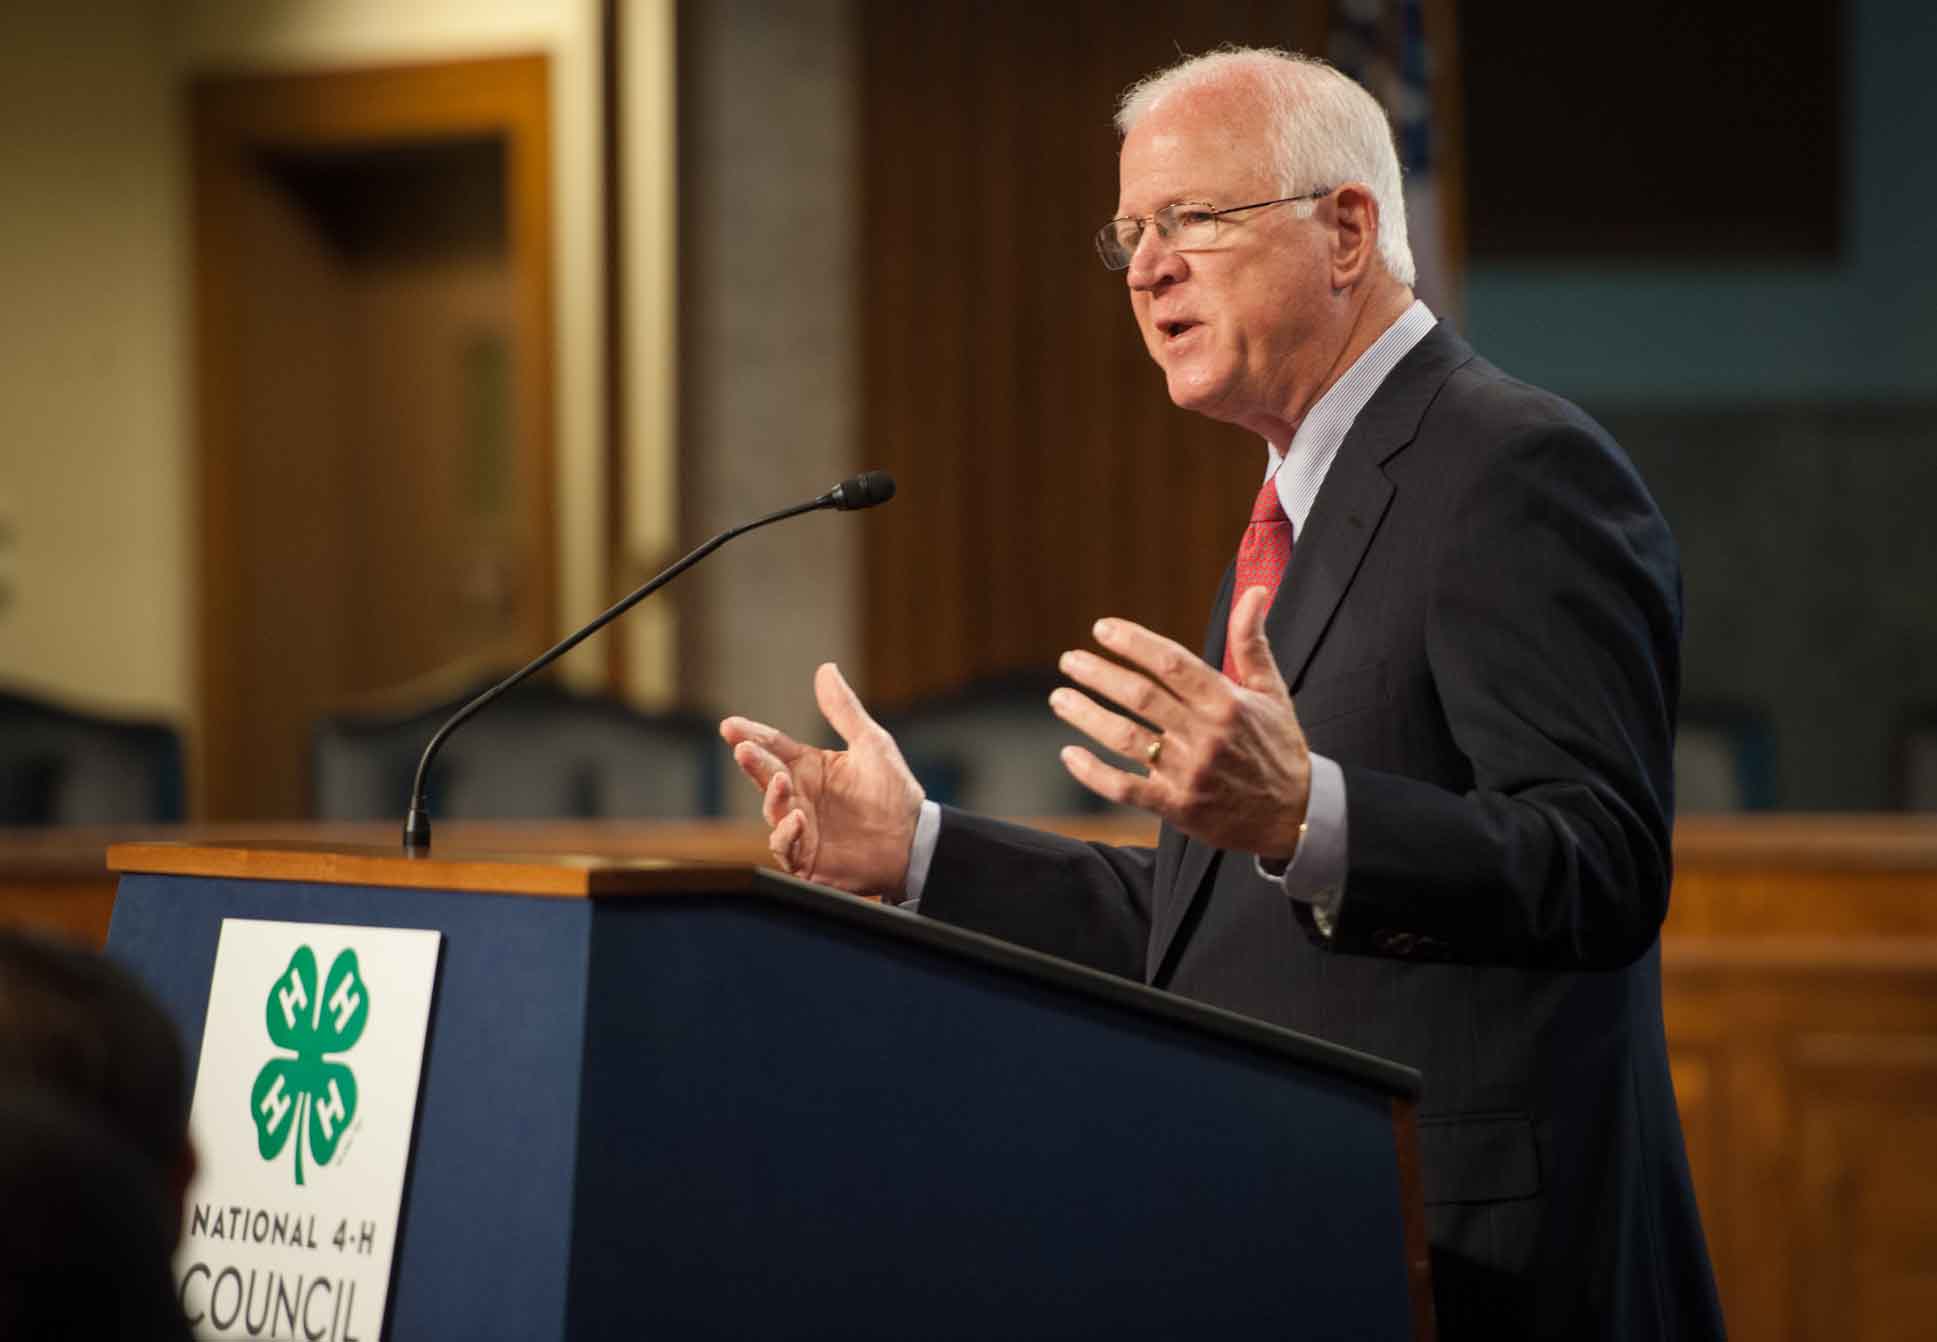 Sen. Saxby Chambliss speaks at the National 4-H Council Breakfast on April 9 in Washington D.C.